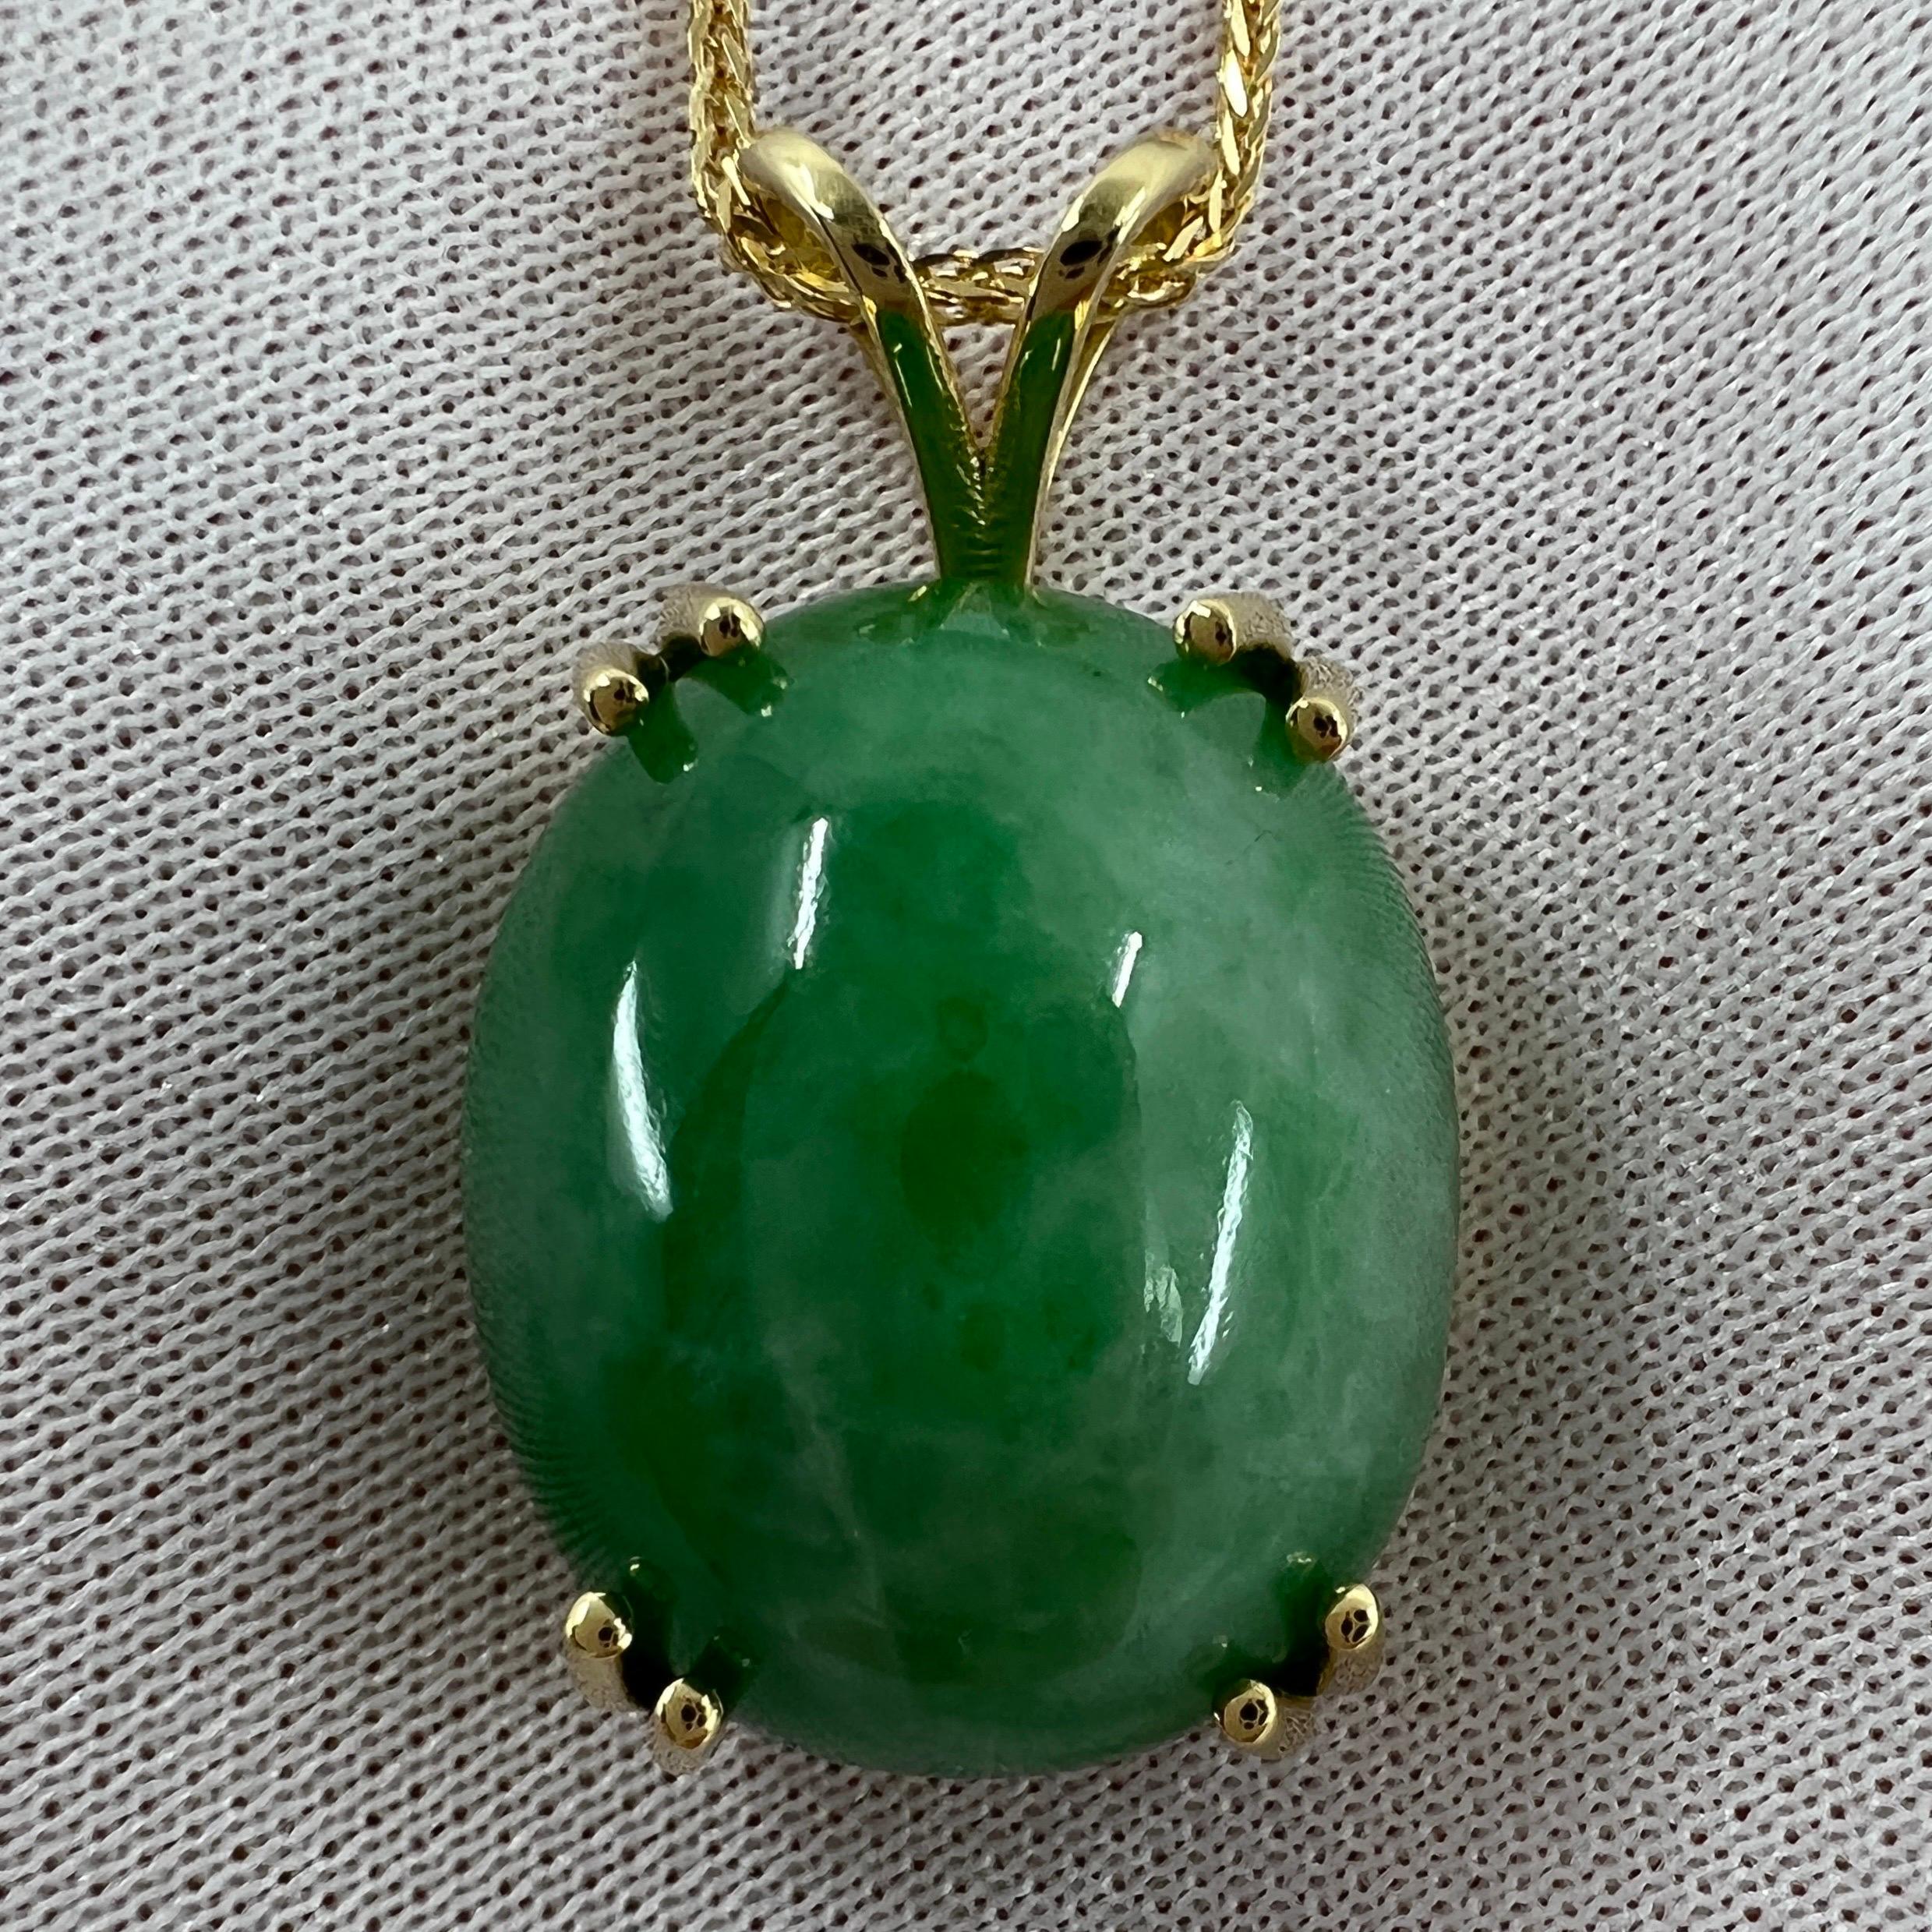 35.69ct GIA Certified Untreated Jadeite Jade A Grade 18k Yellow Gold Pendant For Sale 1